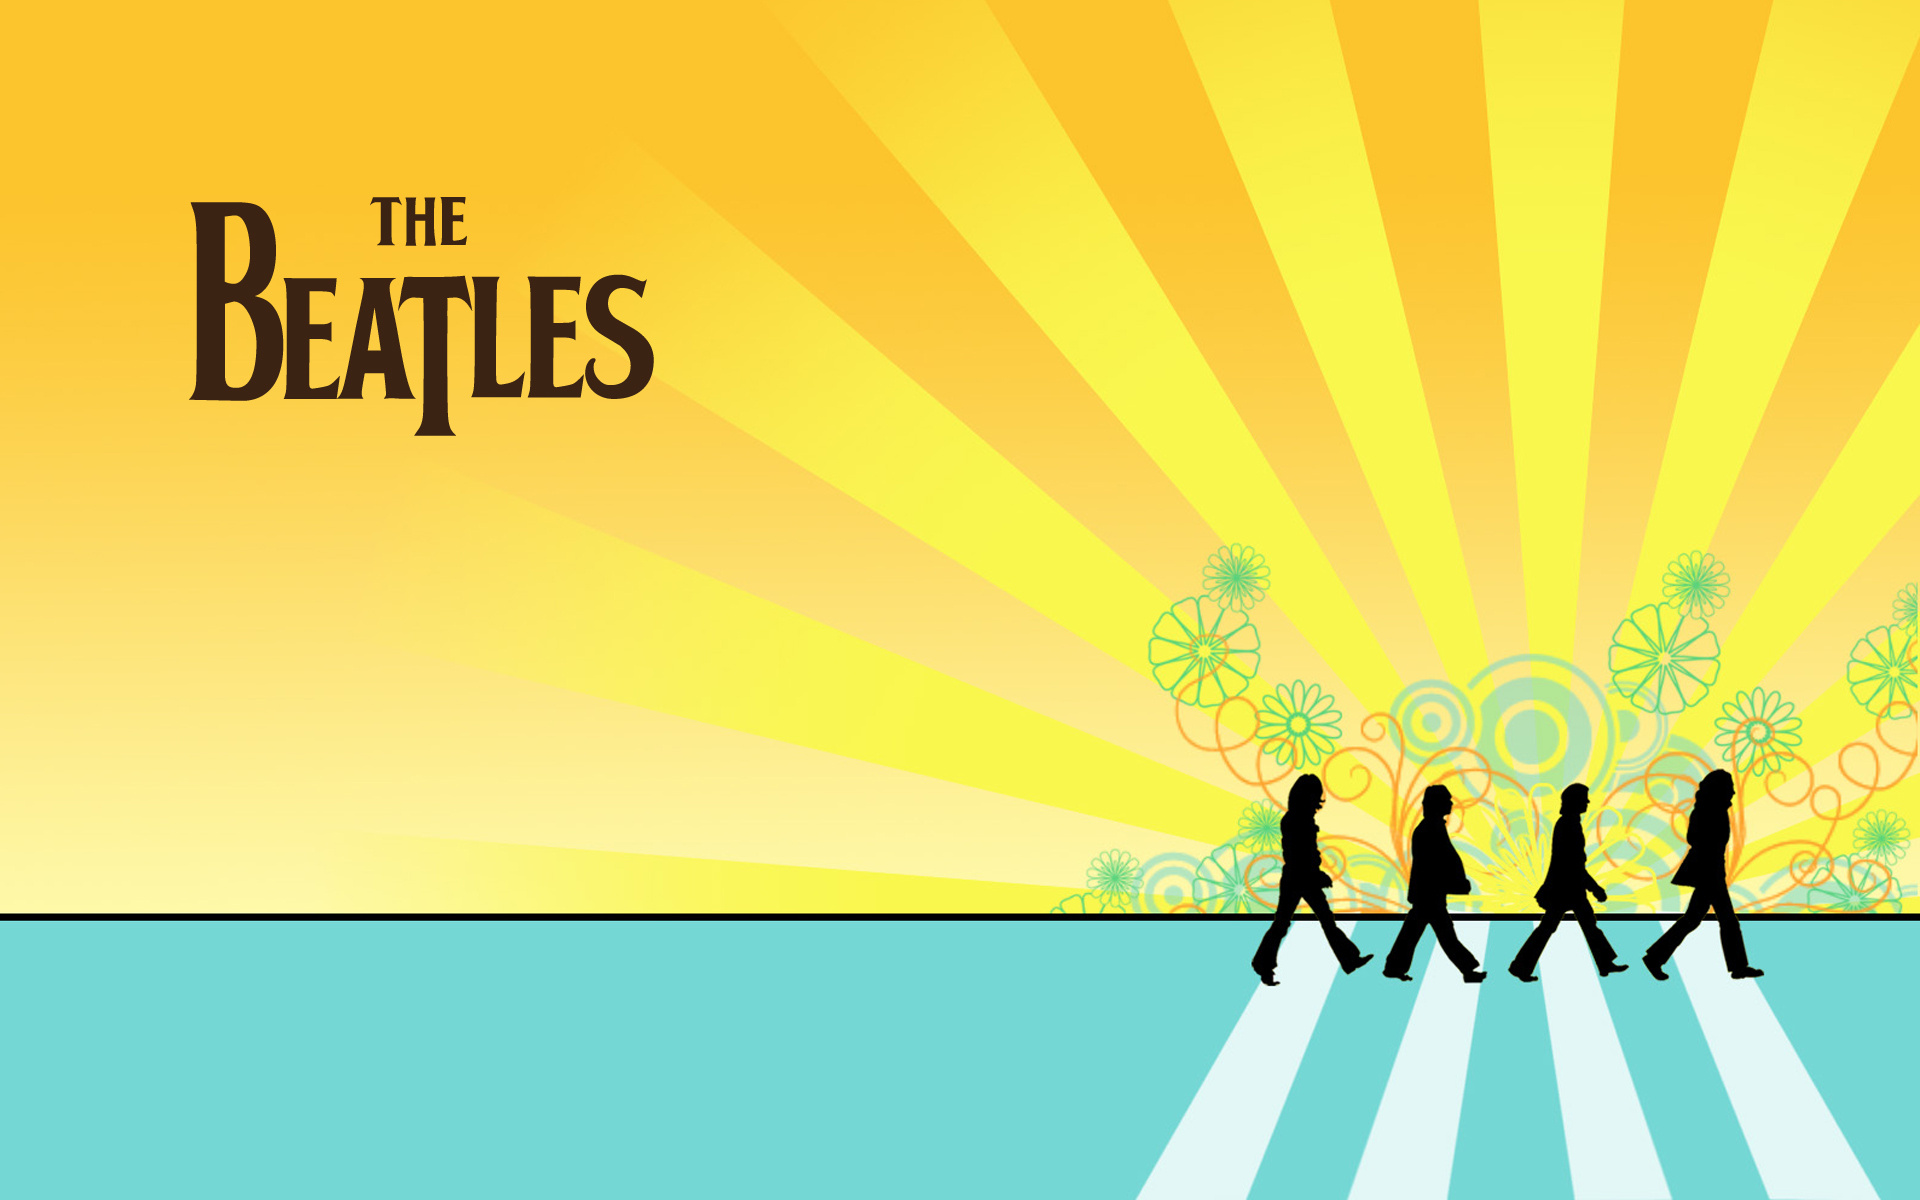 The Beatles Quotes Wallpaper